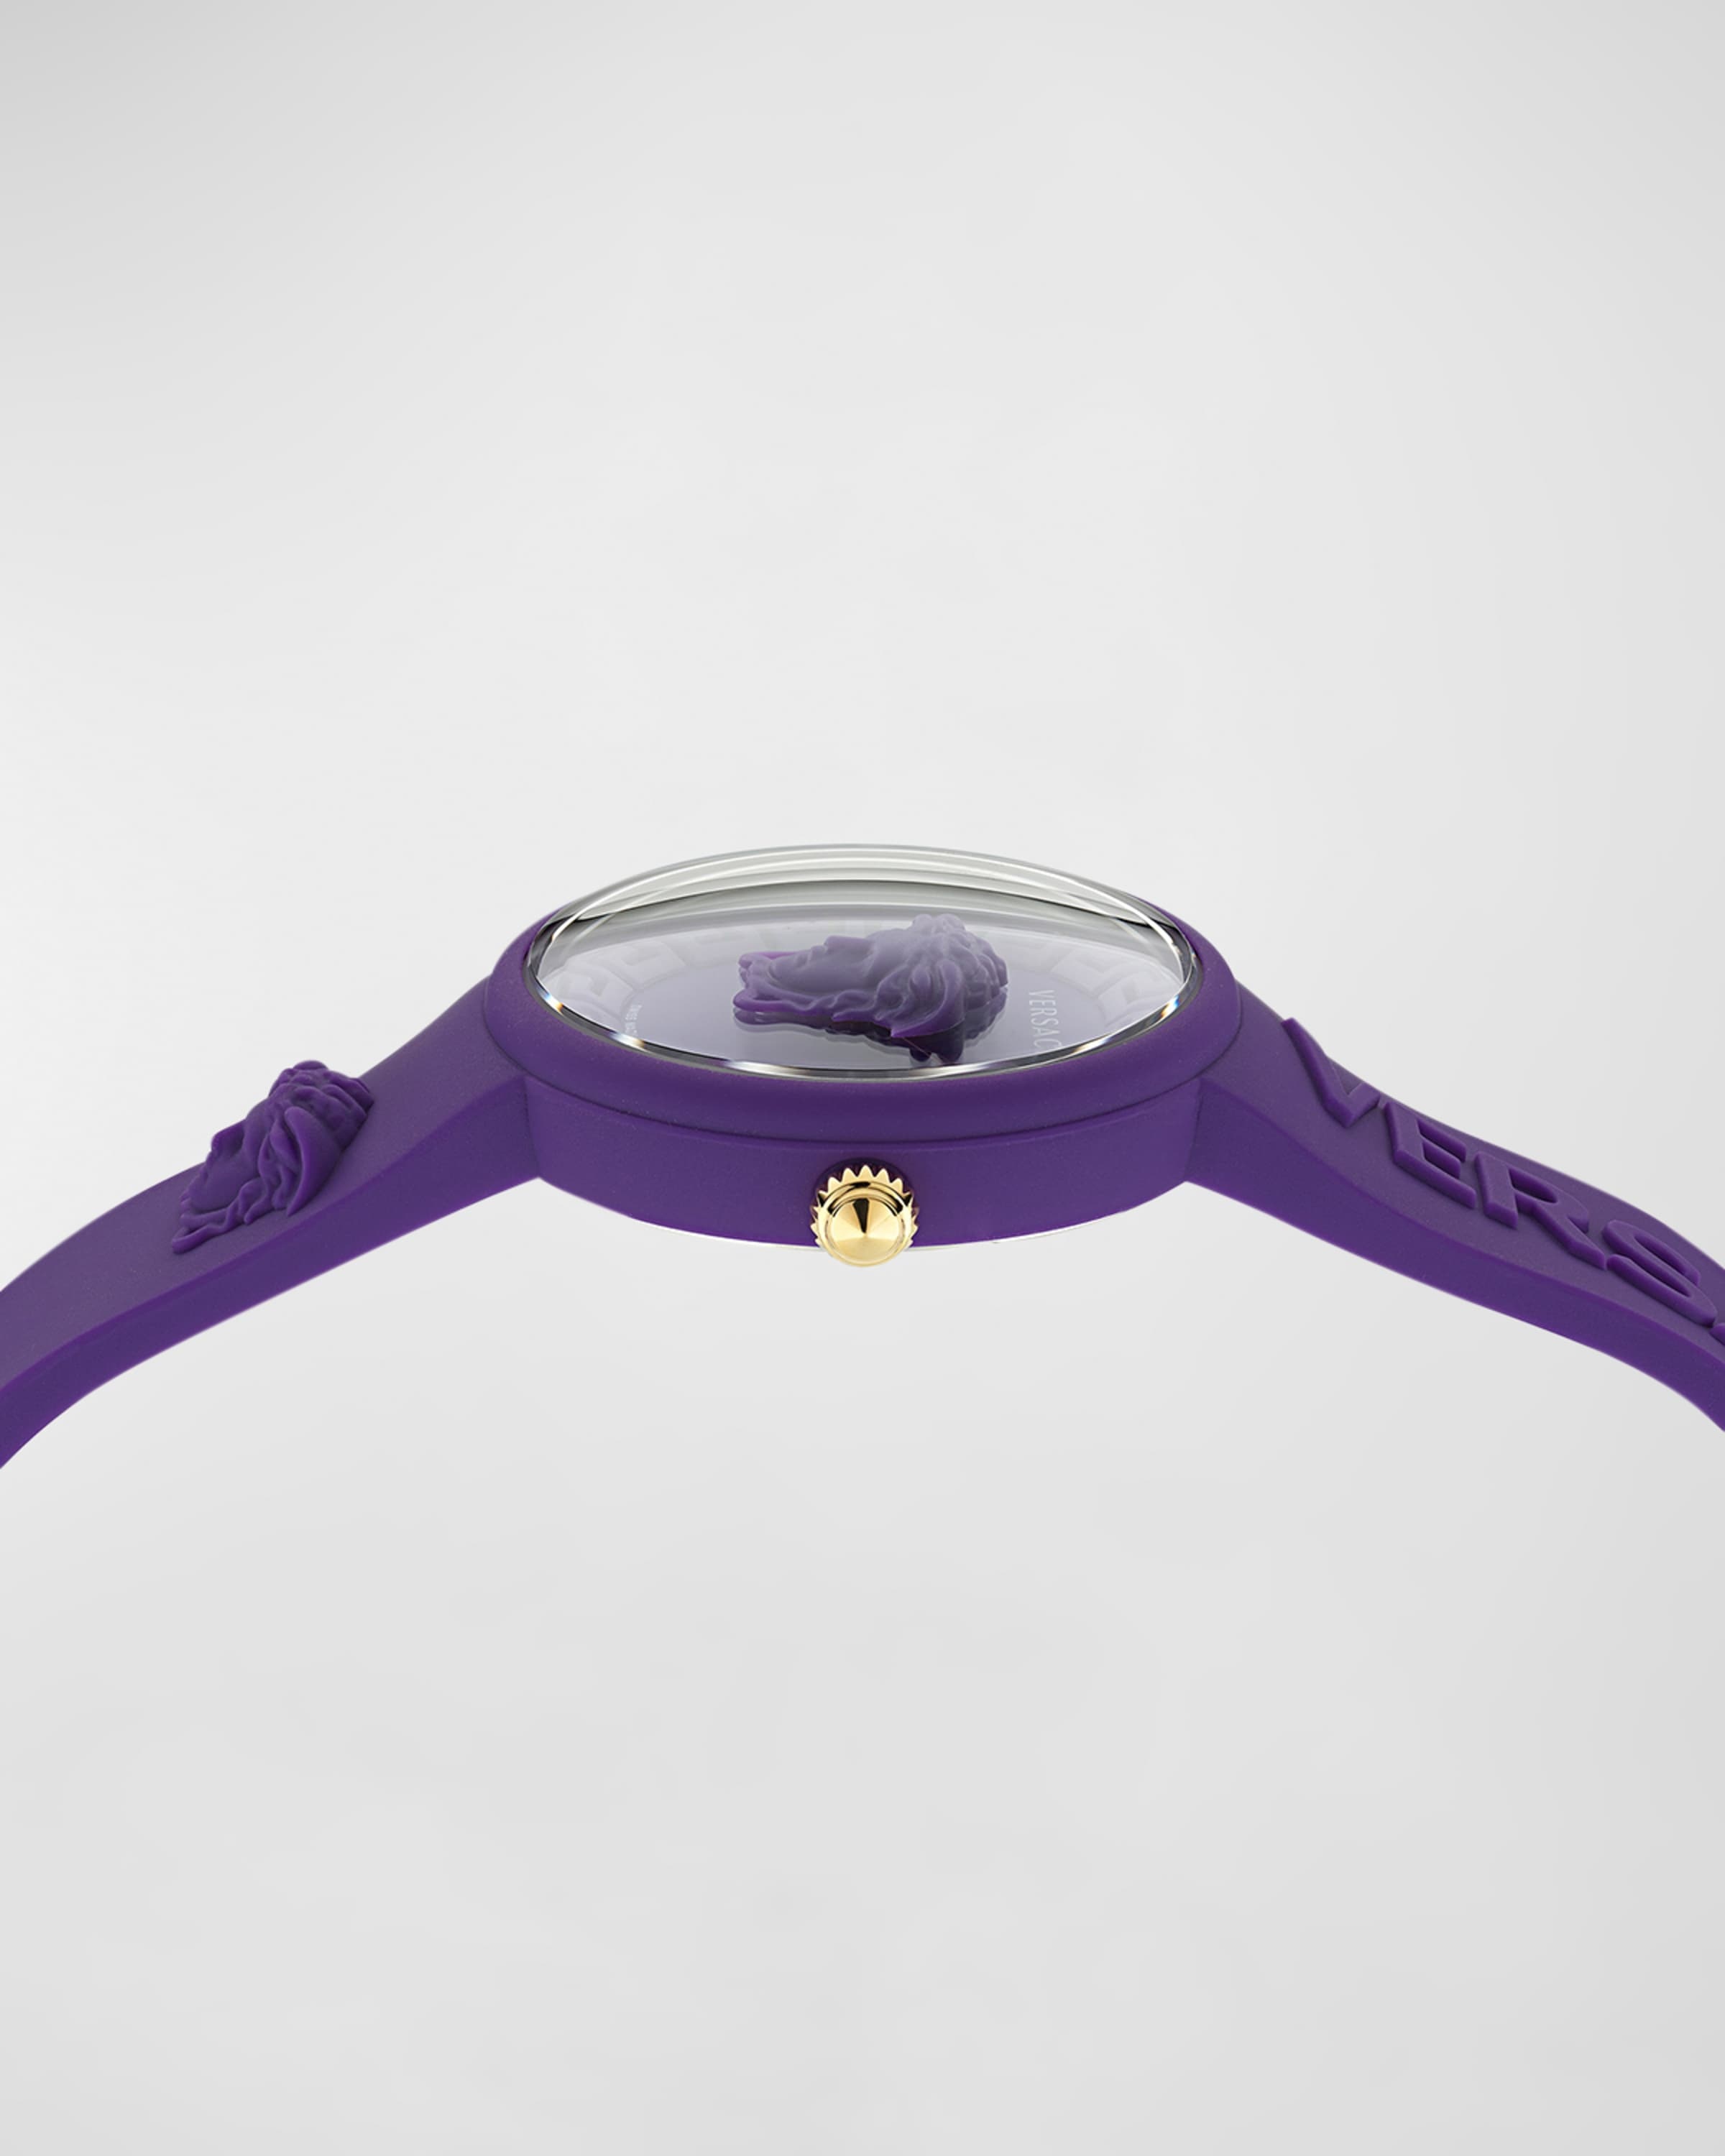 39mm Medusa Pop Watch with Silicone Strap and Matching Case, Purple - 3